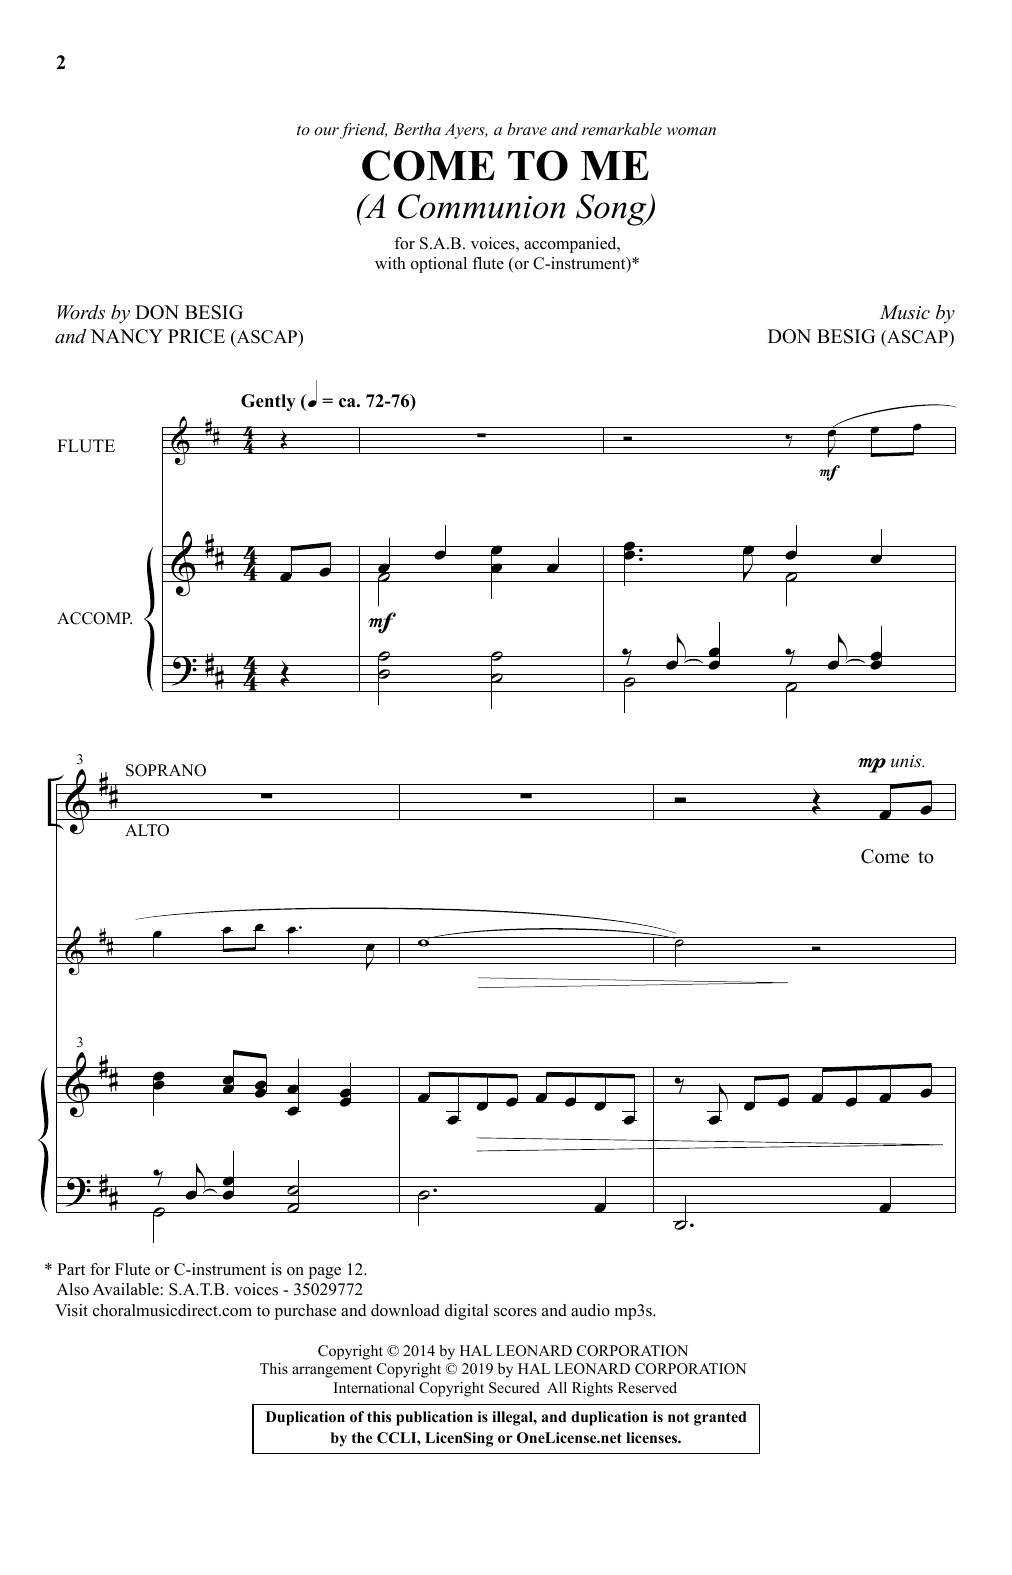 Download Don Besig and Nancy Price Come To Me (A Communion Song) Sheet Music